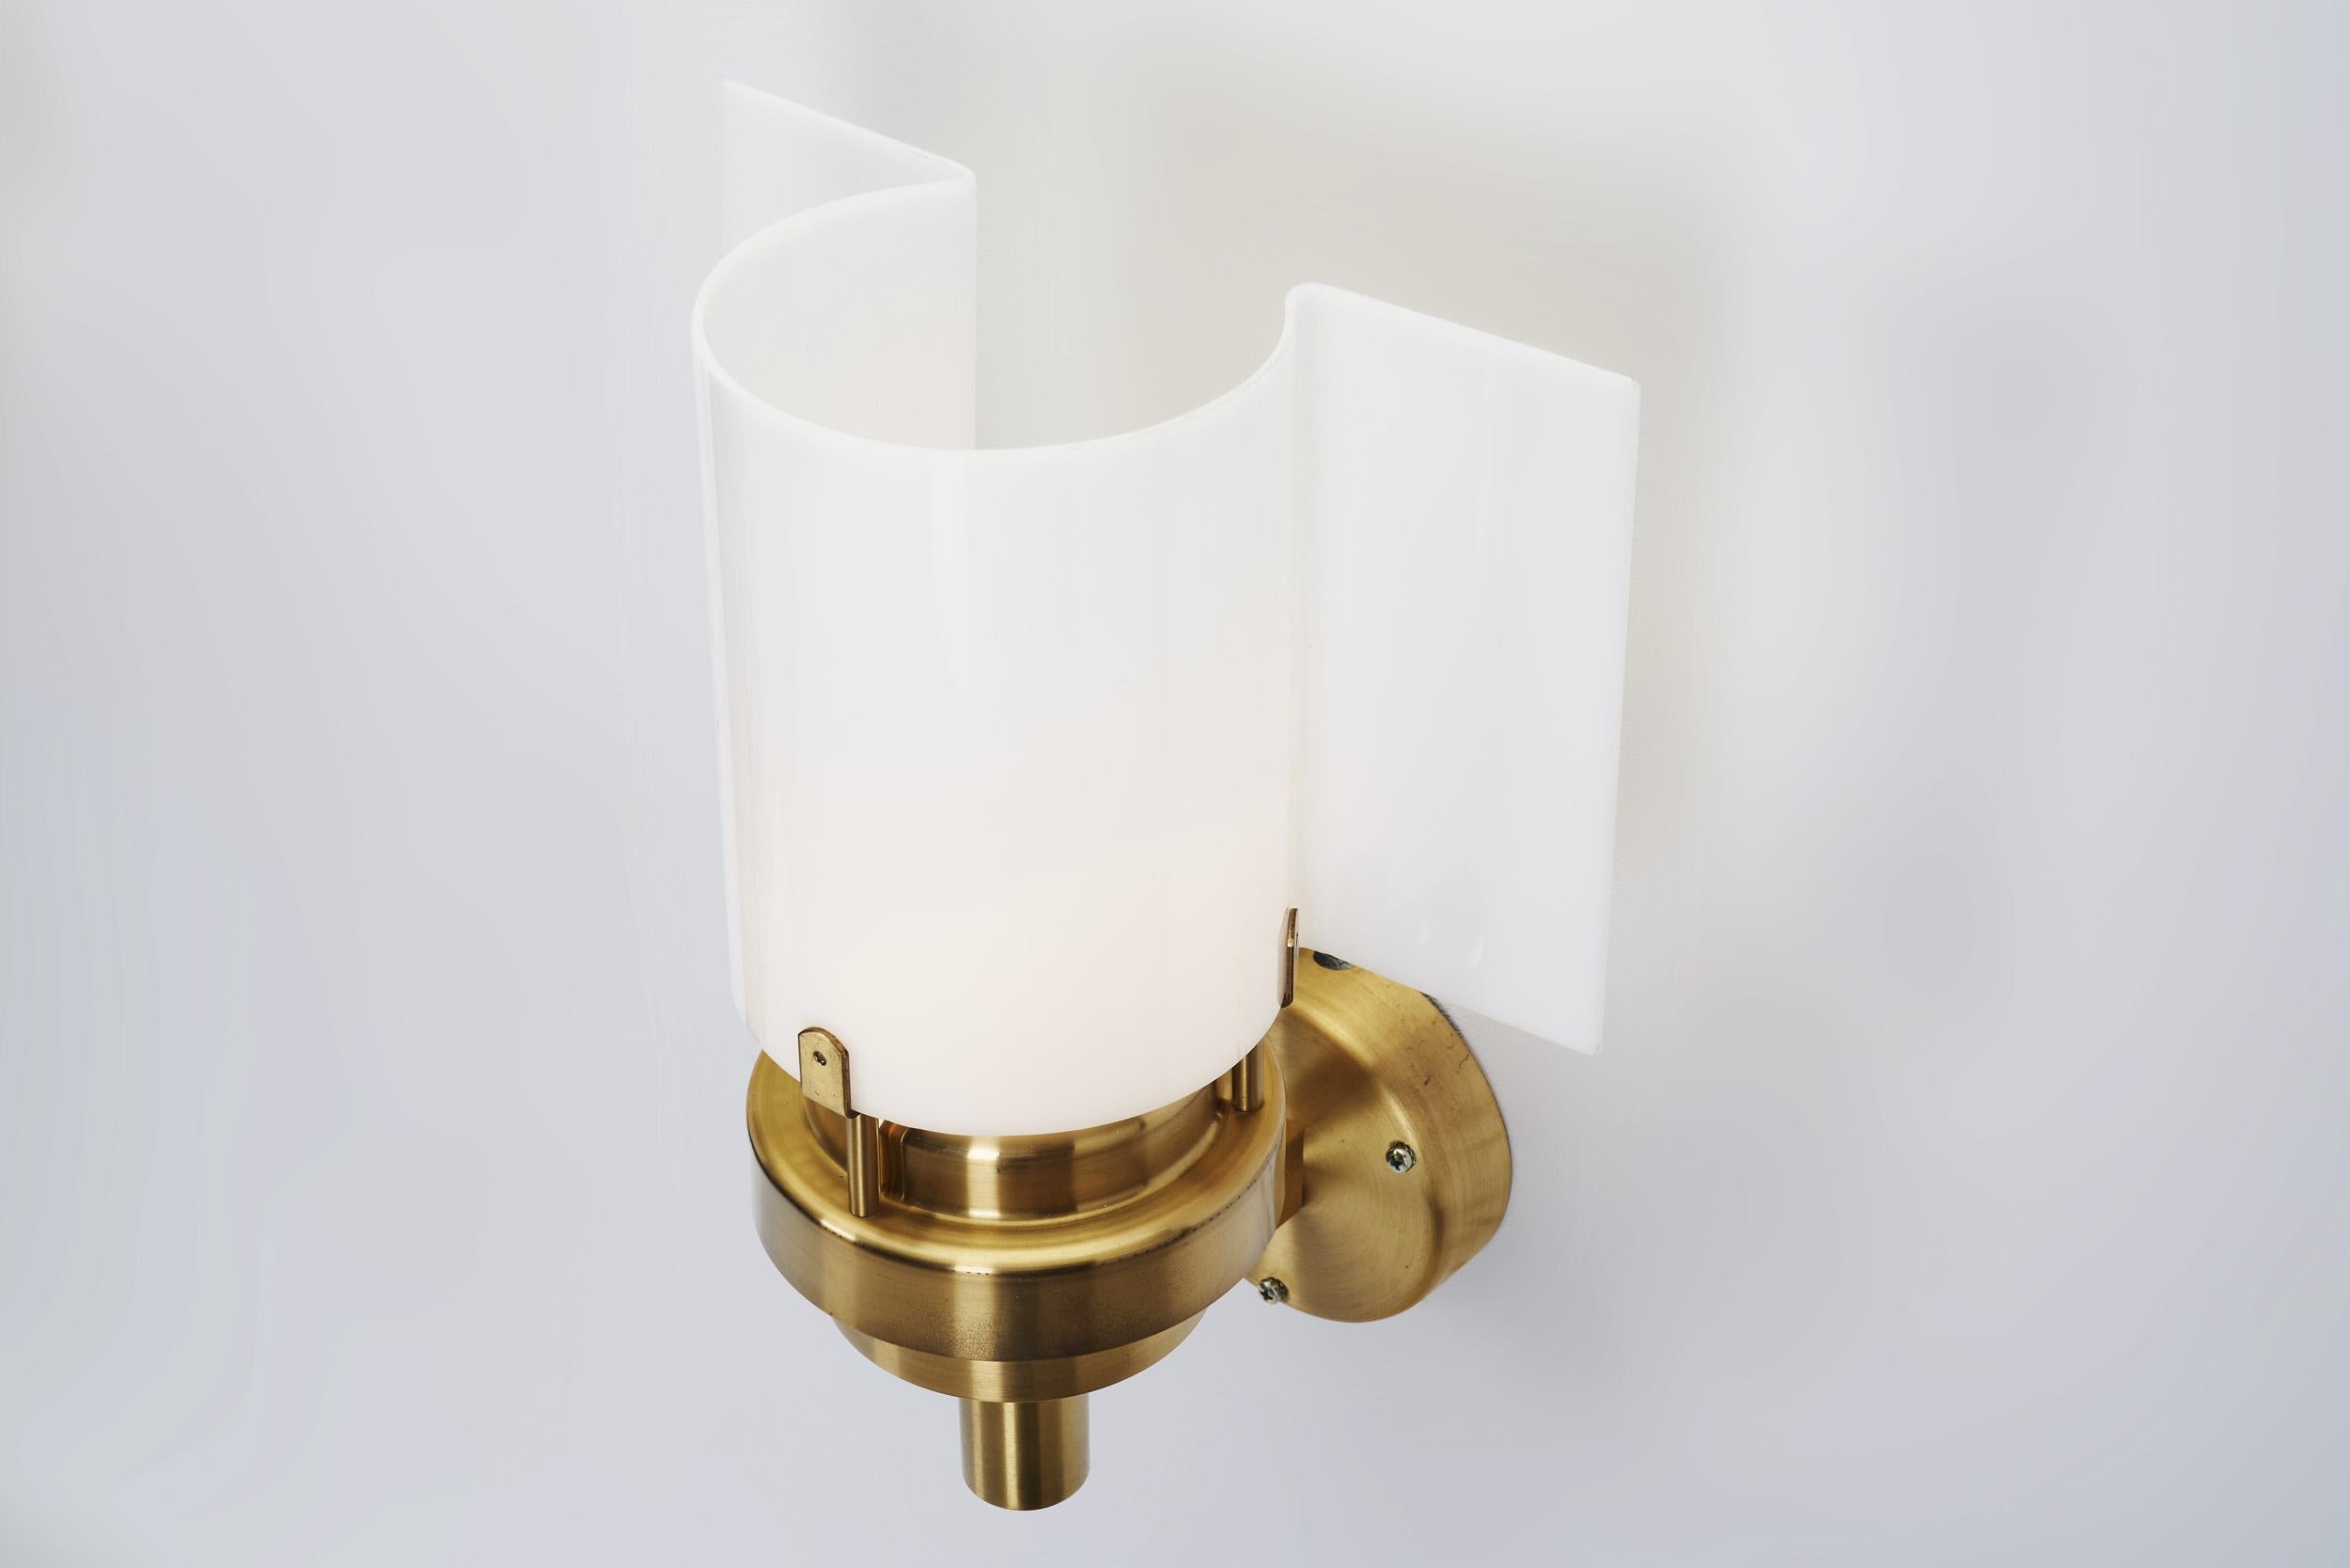 Brass and Acrylic Glass Wall Lamps by Stockmann Orno, Finland 1960s For Sale 5